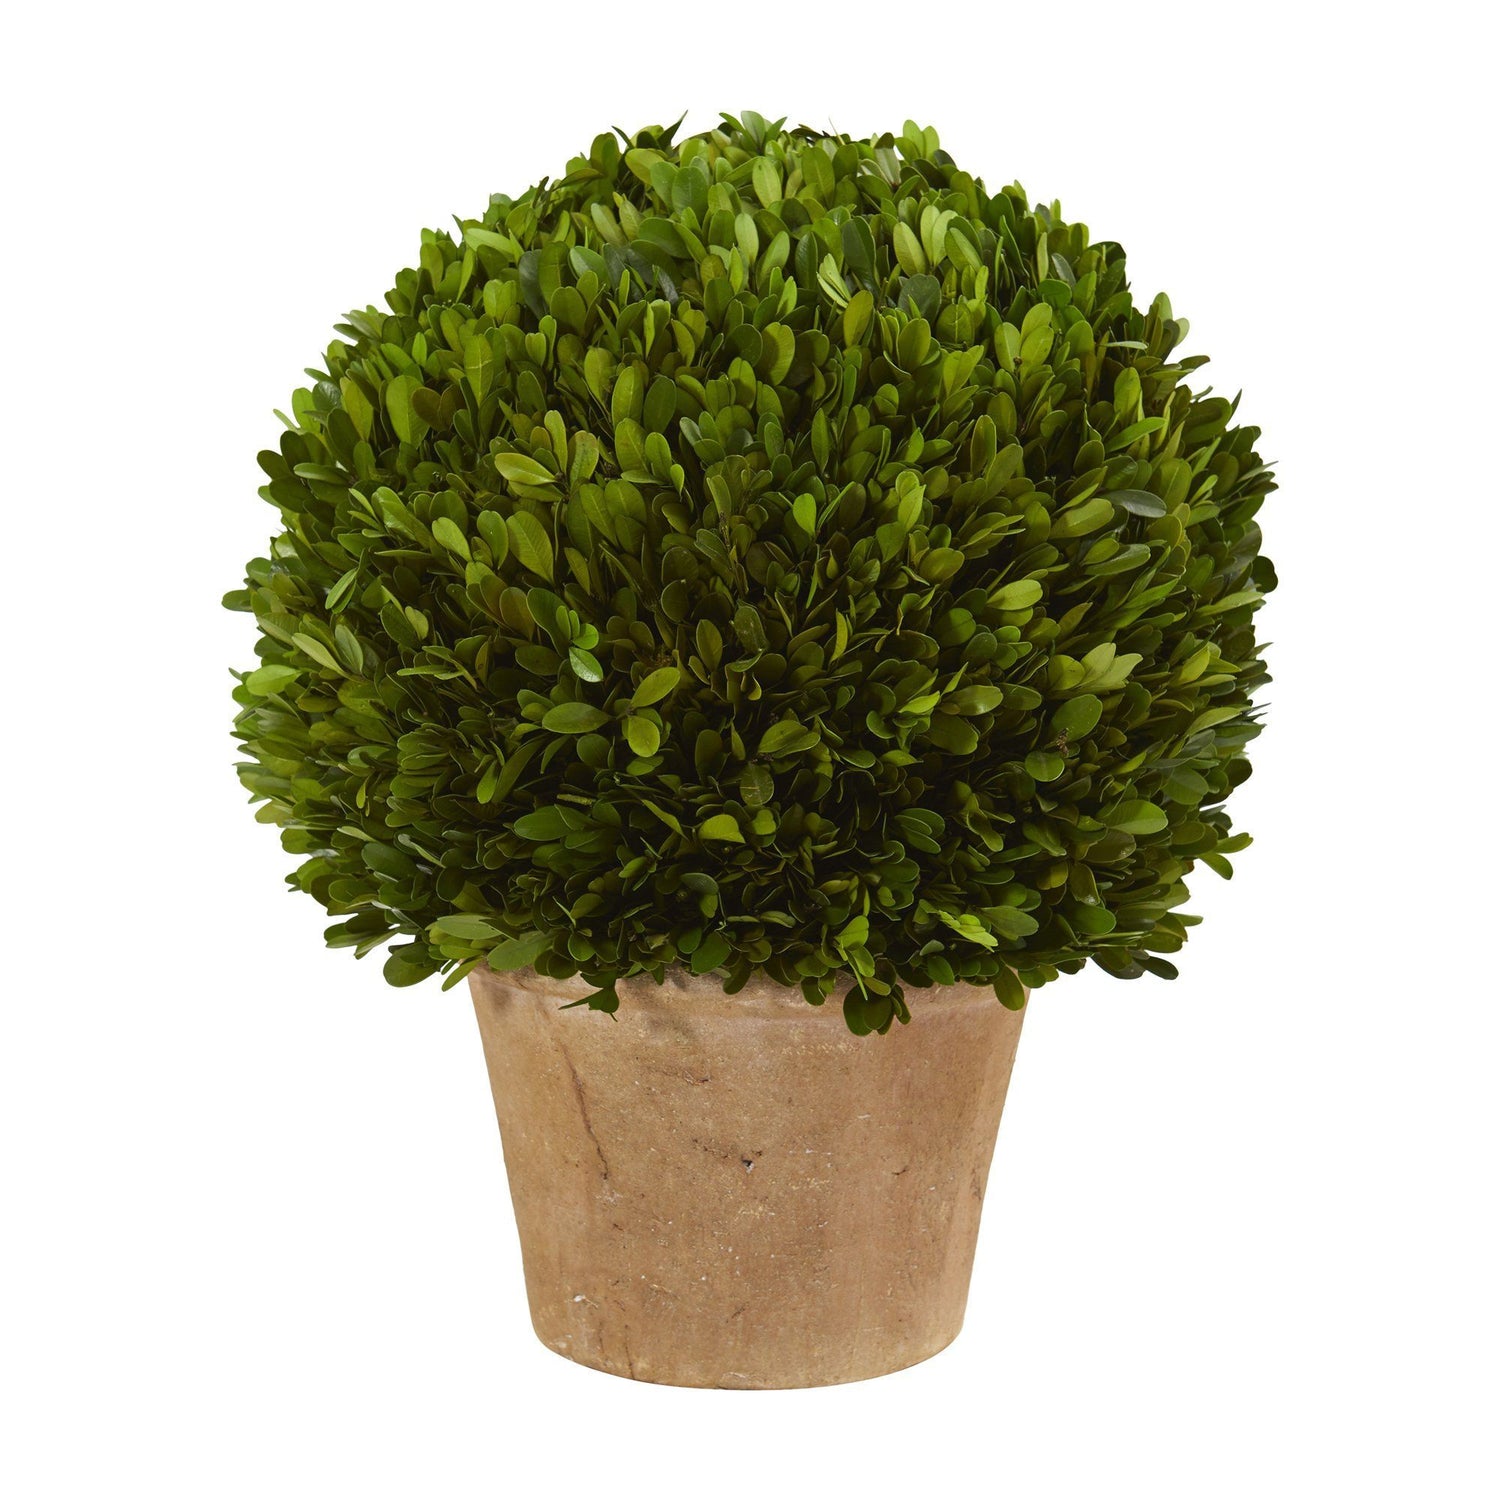 15” Boxwood Ball Preserved Plant in Planter